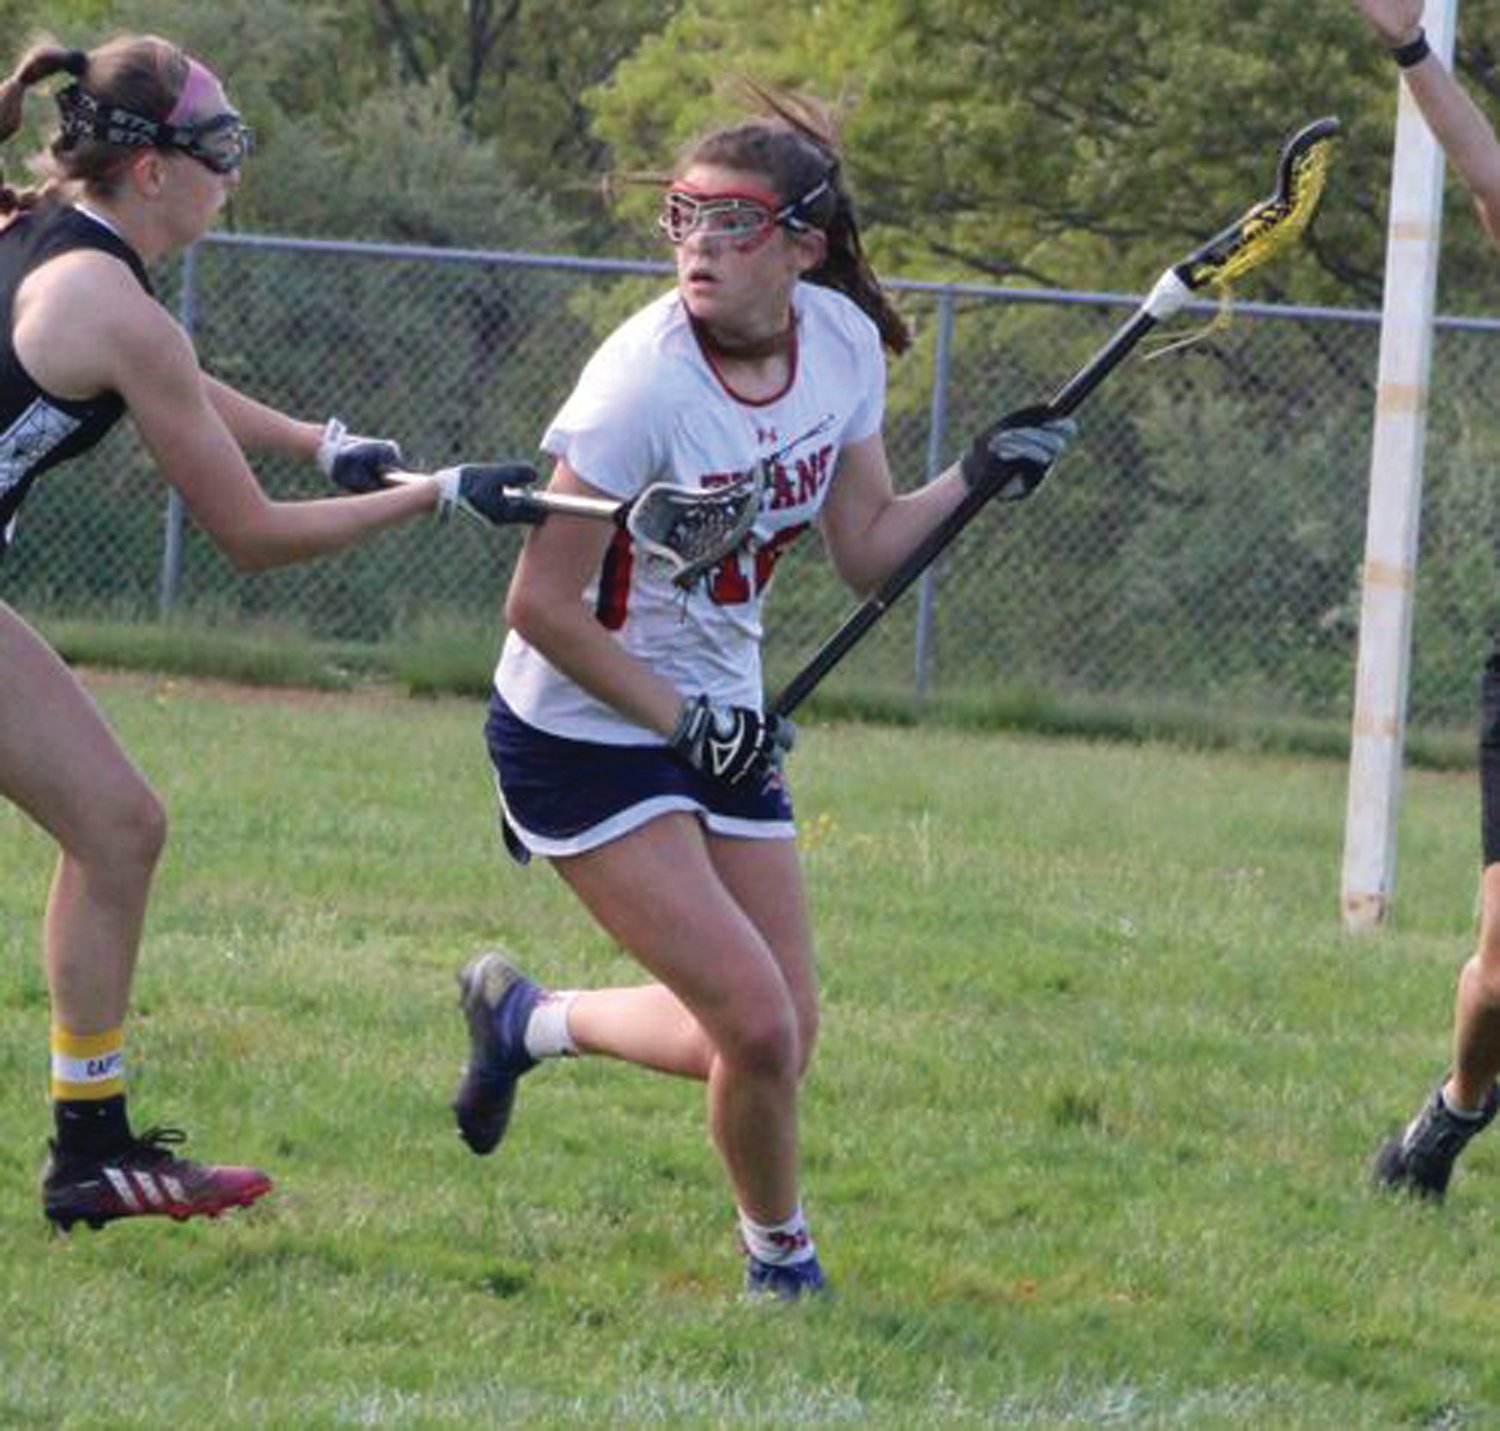 LEADING THE WAY: Toll Gate’s Addie Areson, who led the team with four goals. (Photos by Ryan D. Murray)